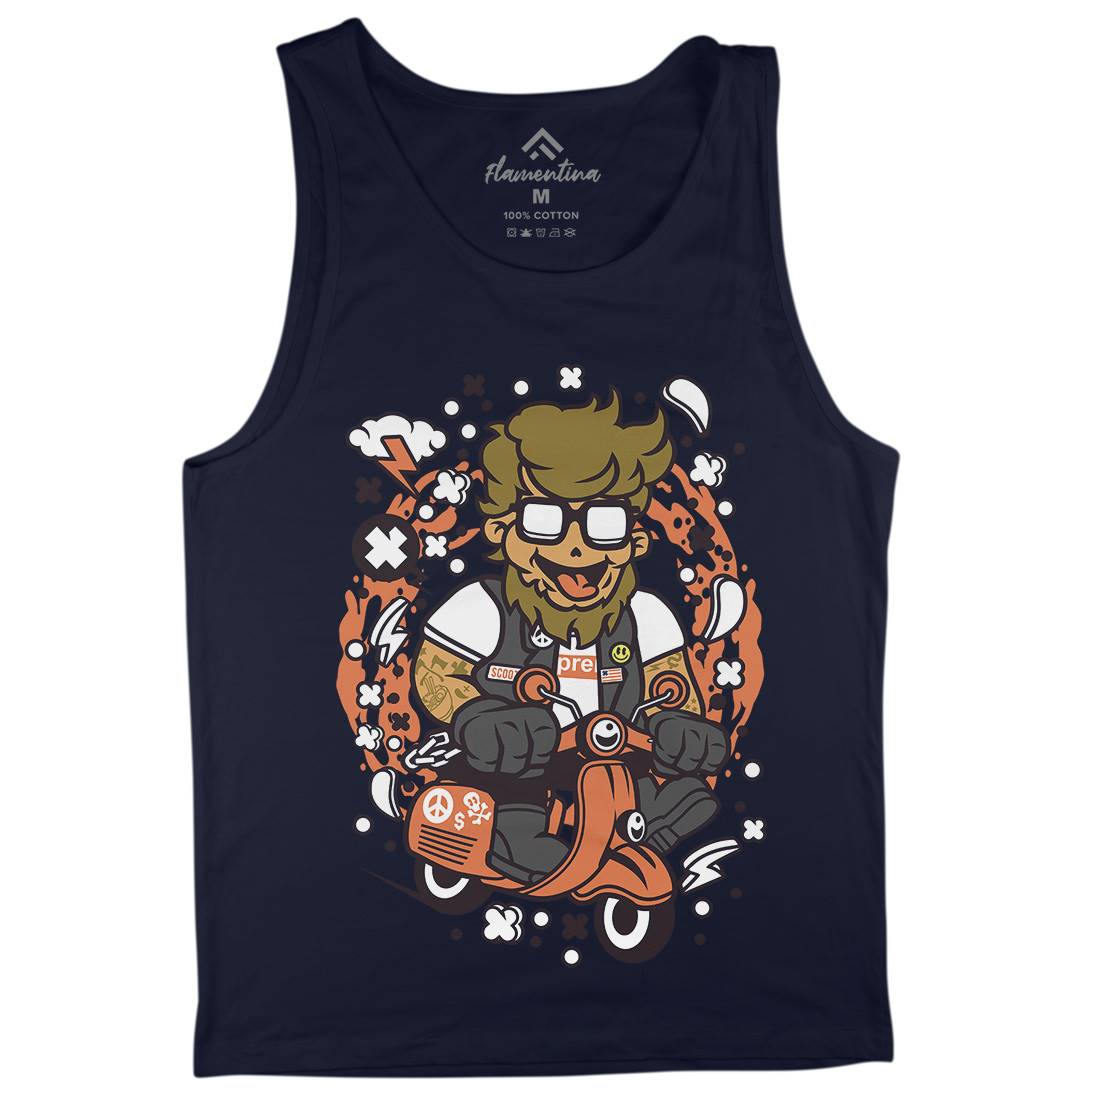 Hipster Scooter Mens Tank Top Vest Motorcycles C565